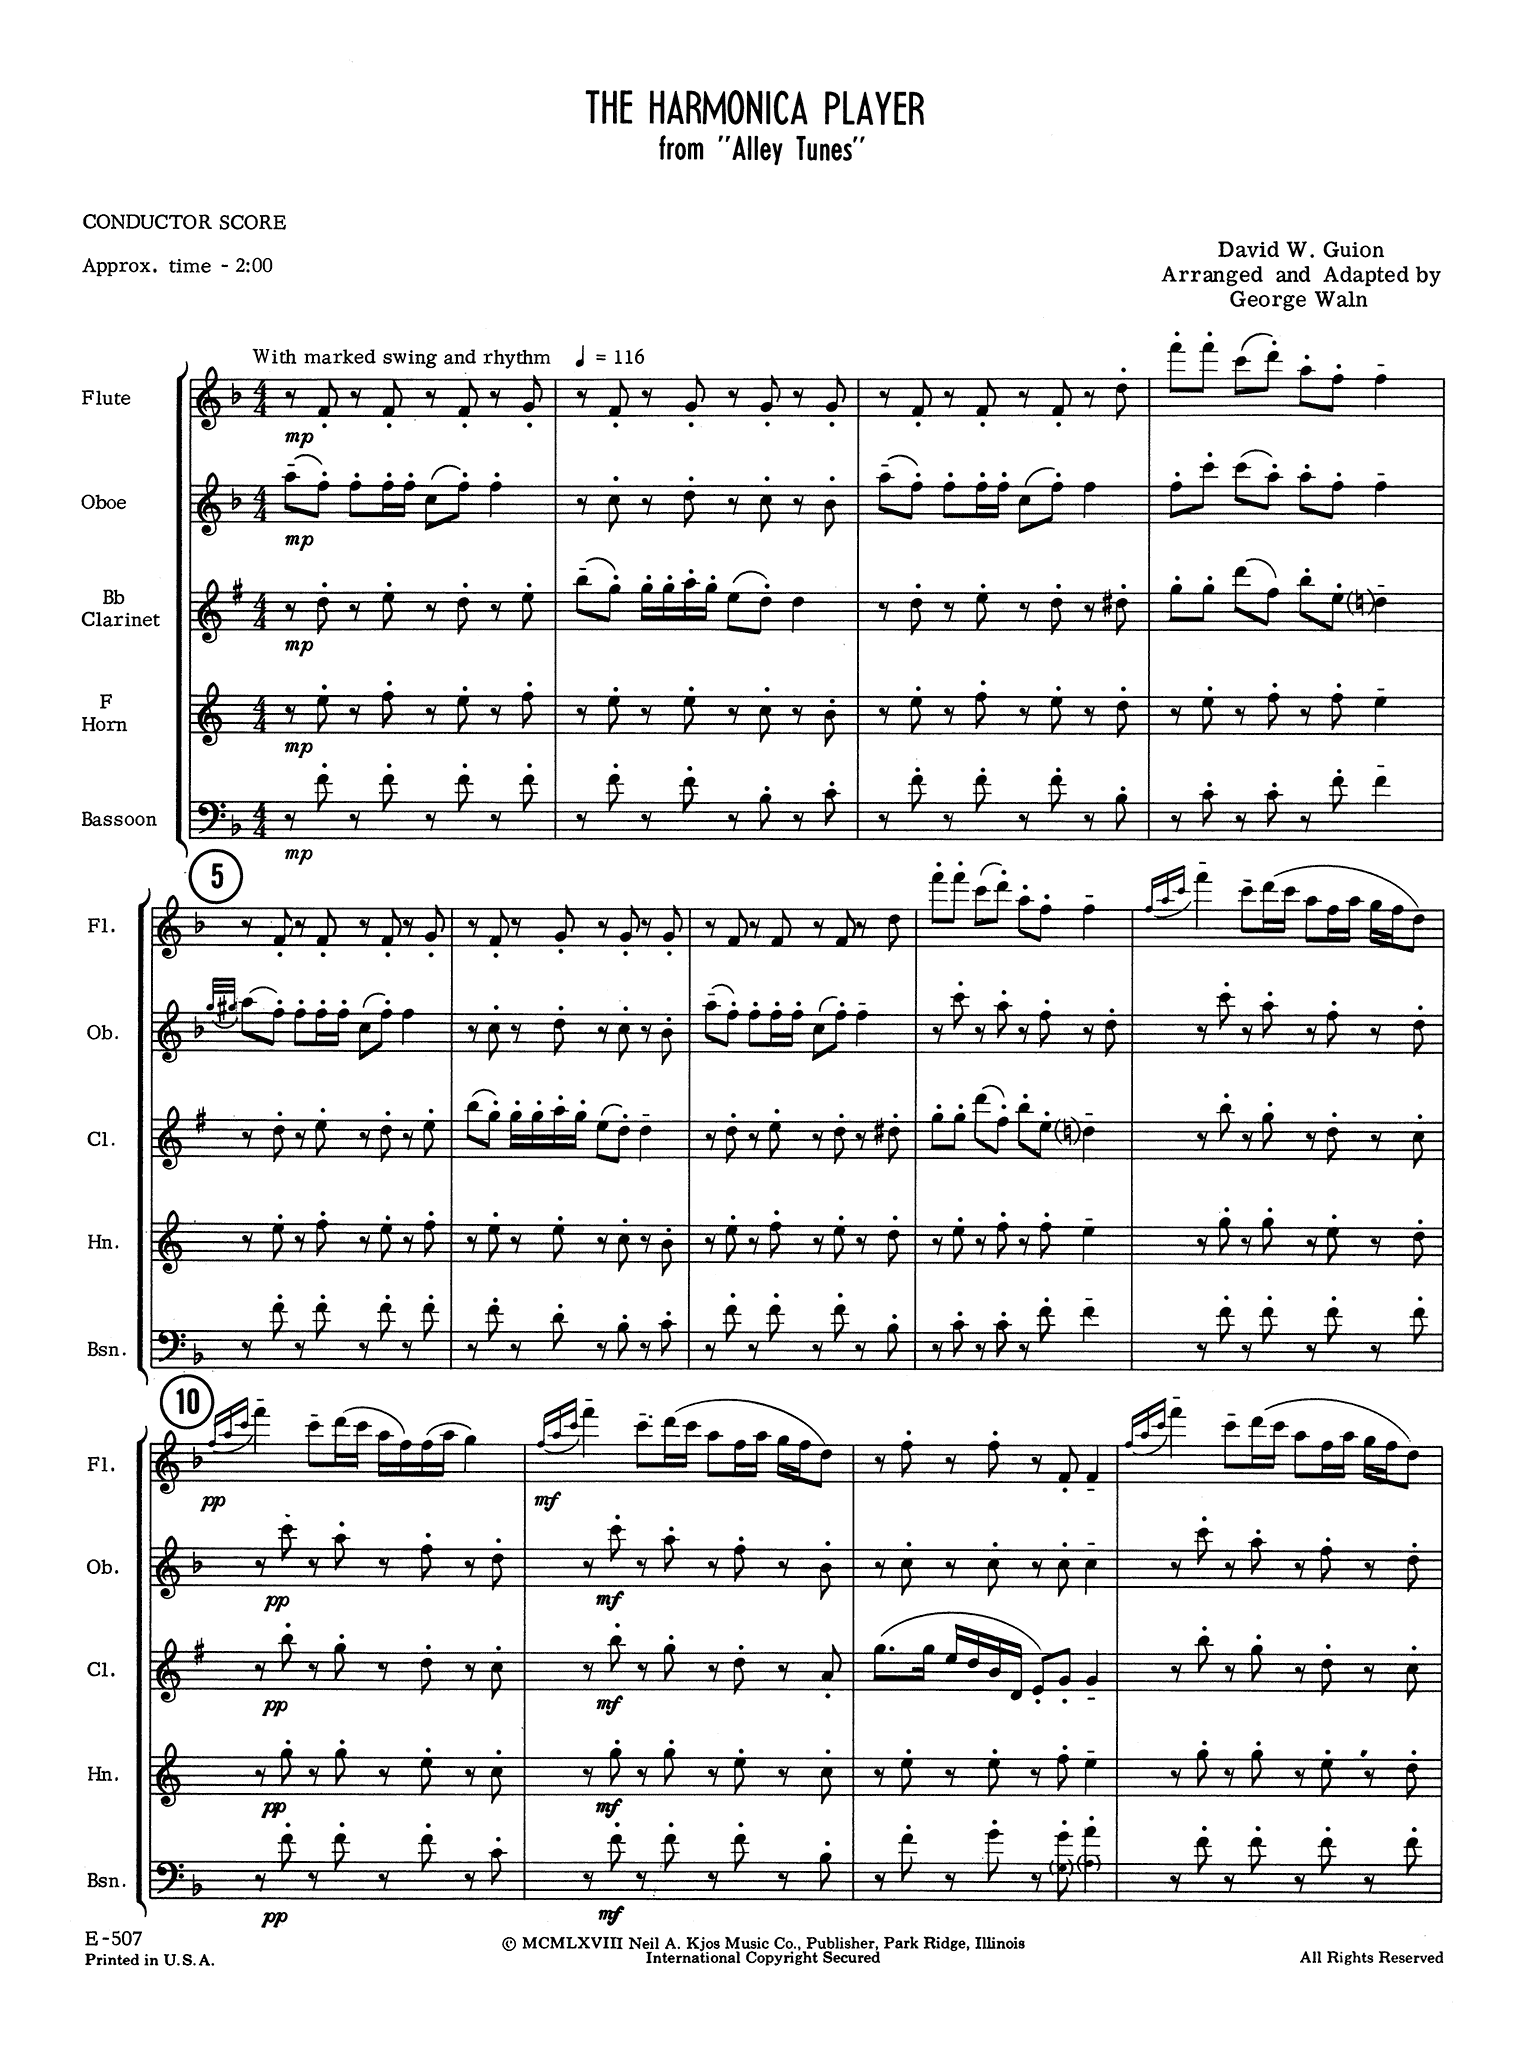 Guion The Harmonica Player, from 'Alley Tunes: Three Scenes from the South' wind quintet arrangement  score